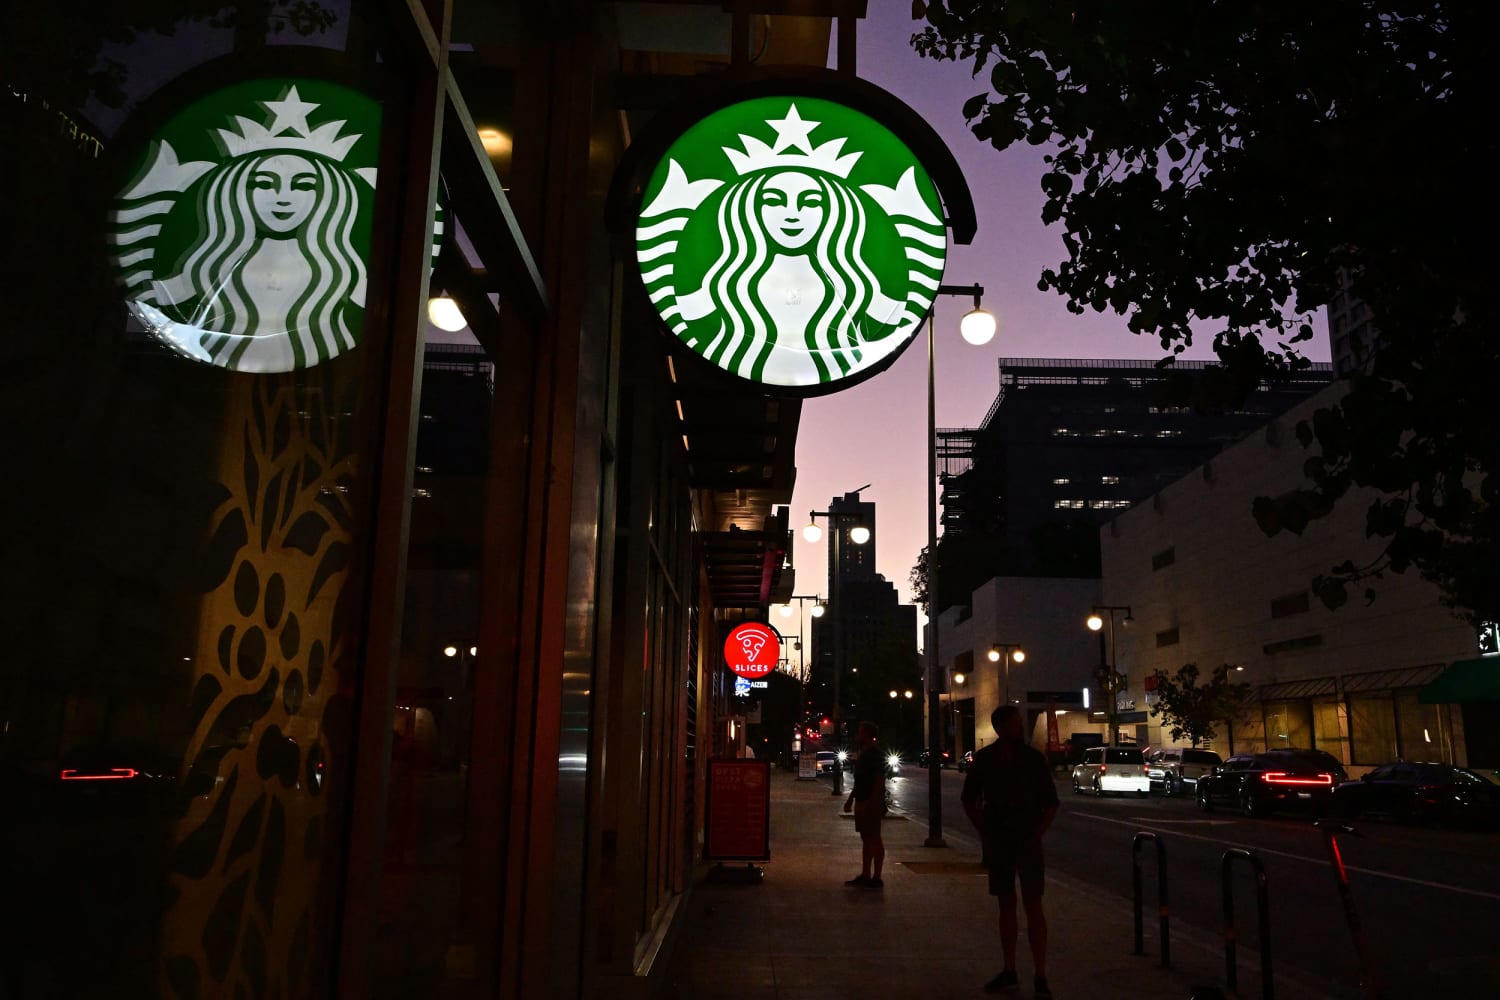 Starbucks has been sued for allegedly using coffee from farms in violation of rights while promoting its “ethical” sourcing.